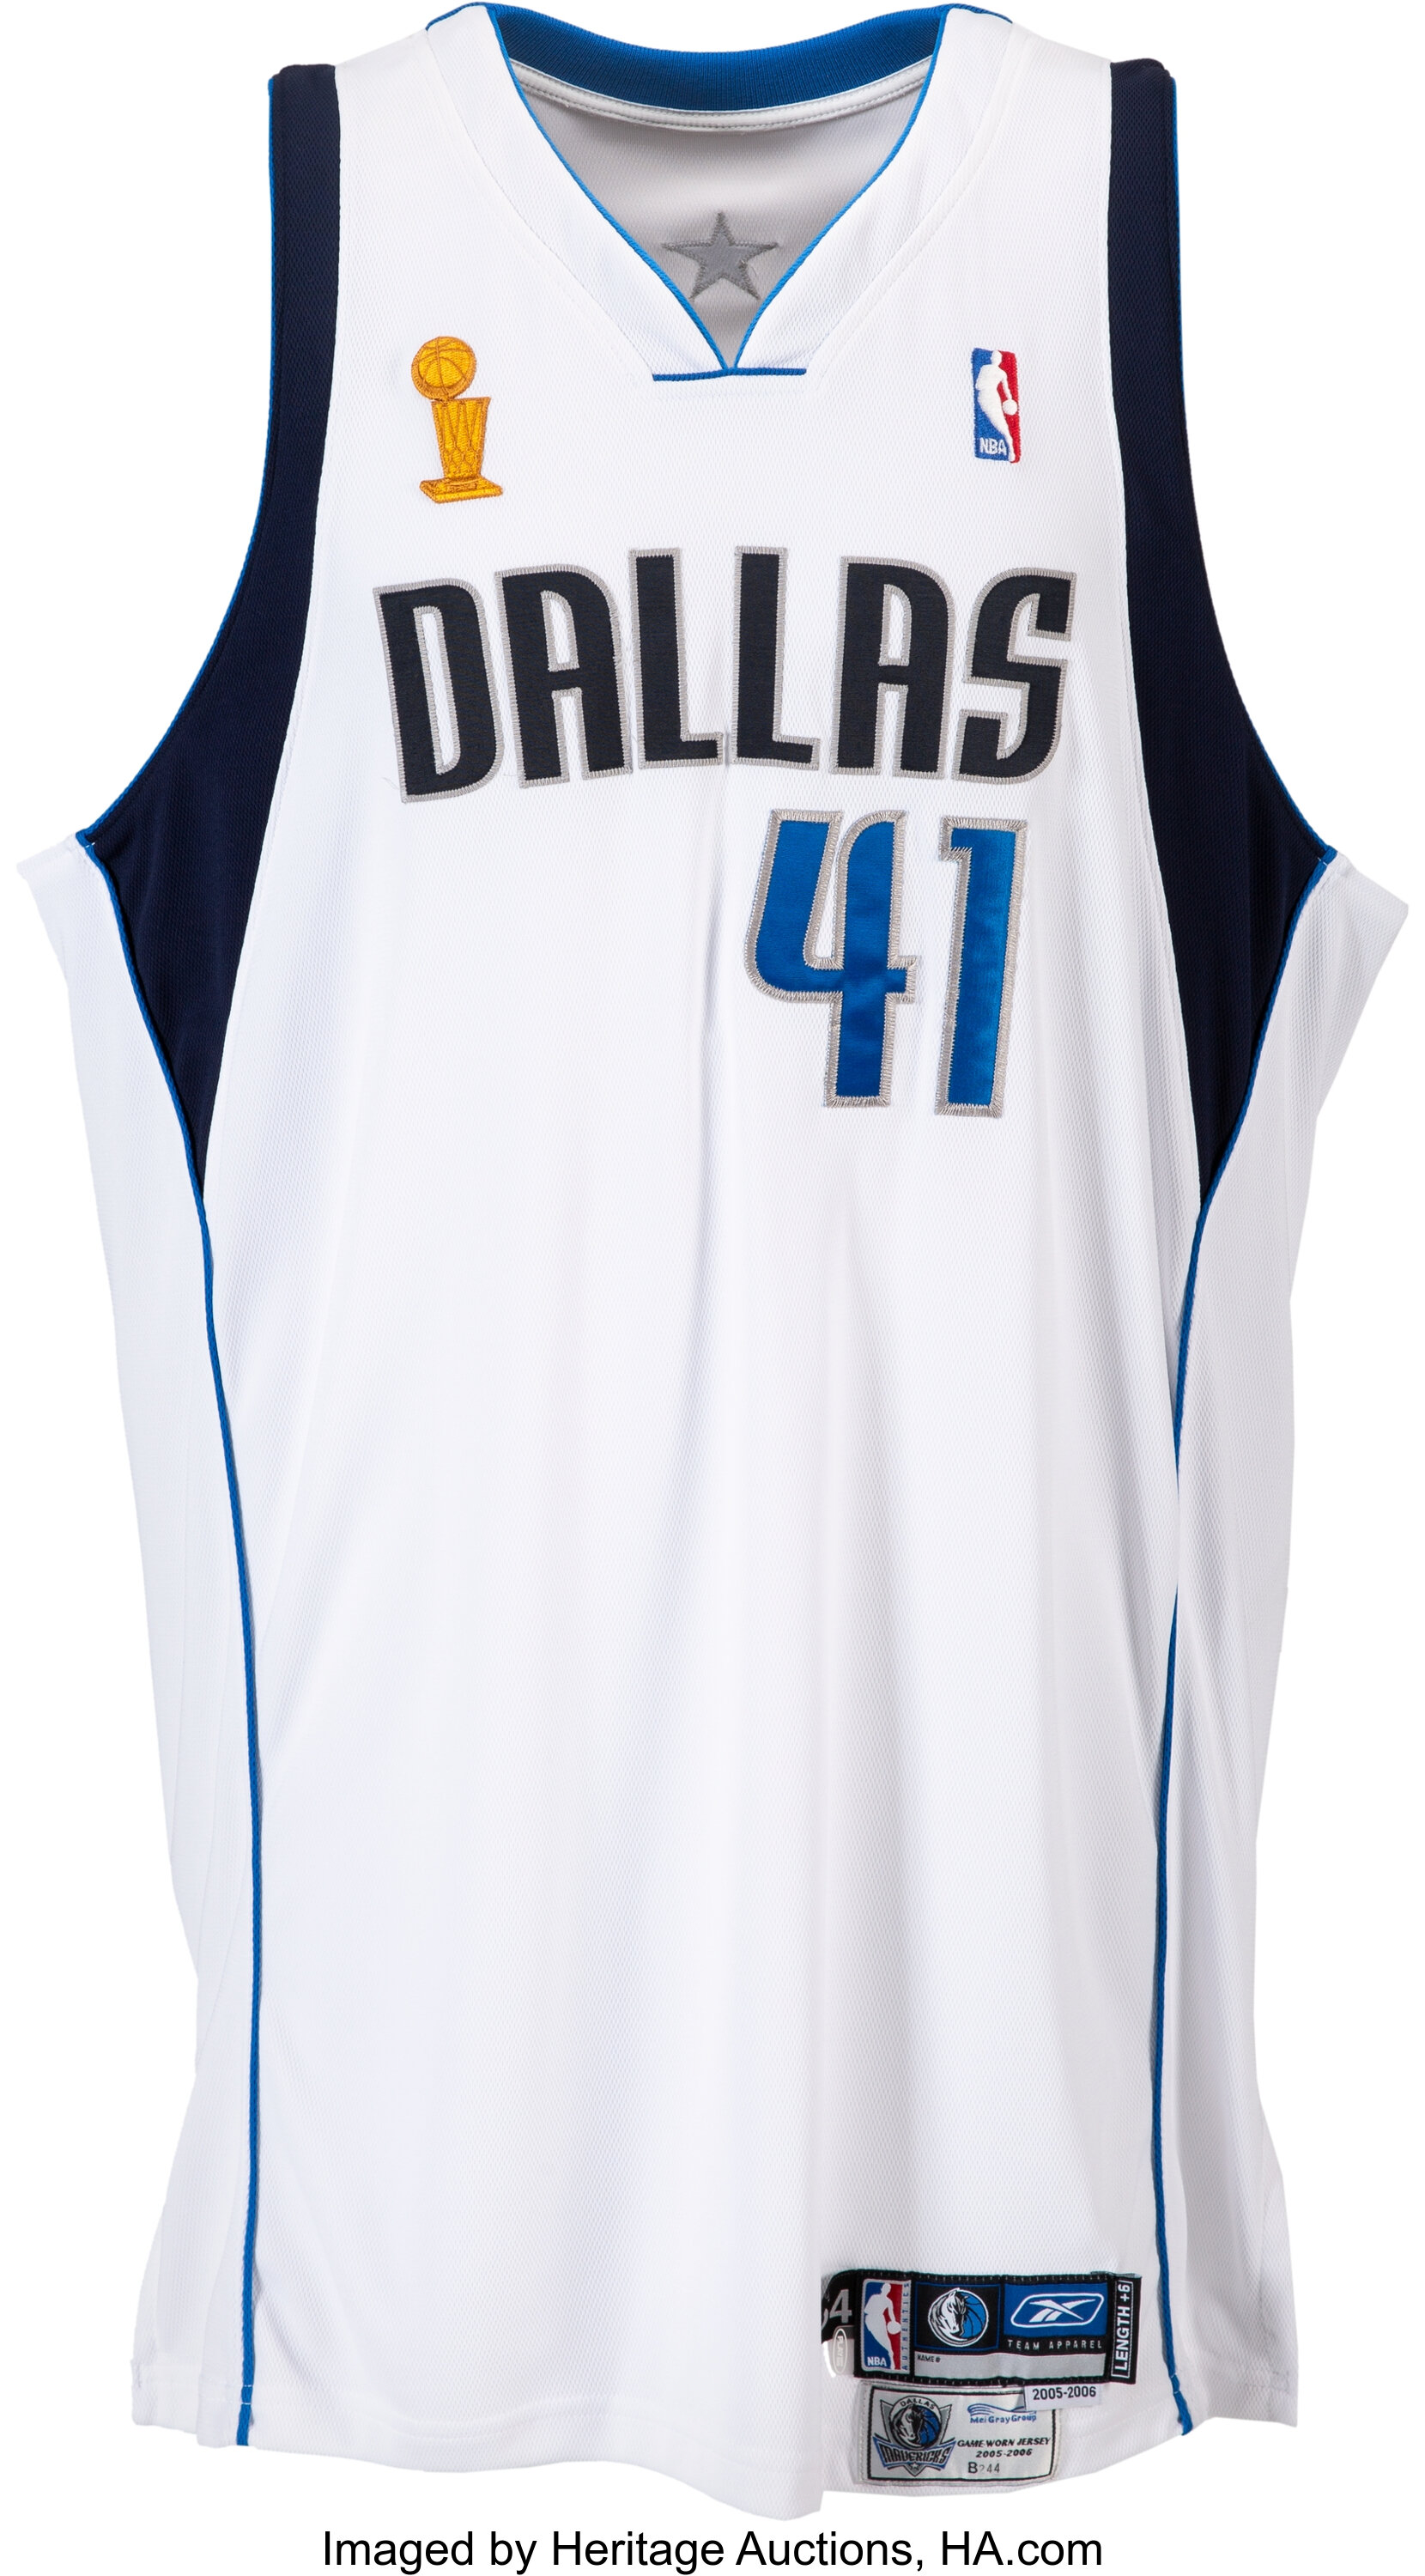 2006 Dirk Nowitzki Nba Finals Game Two Worn Signed Dallas Lot 53337 Heritage Auctions